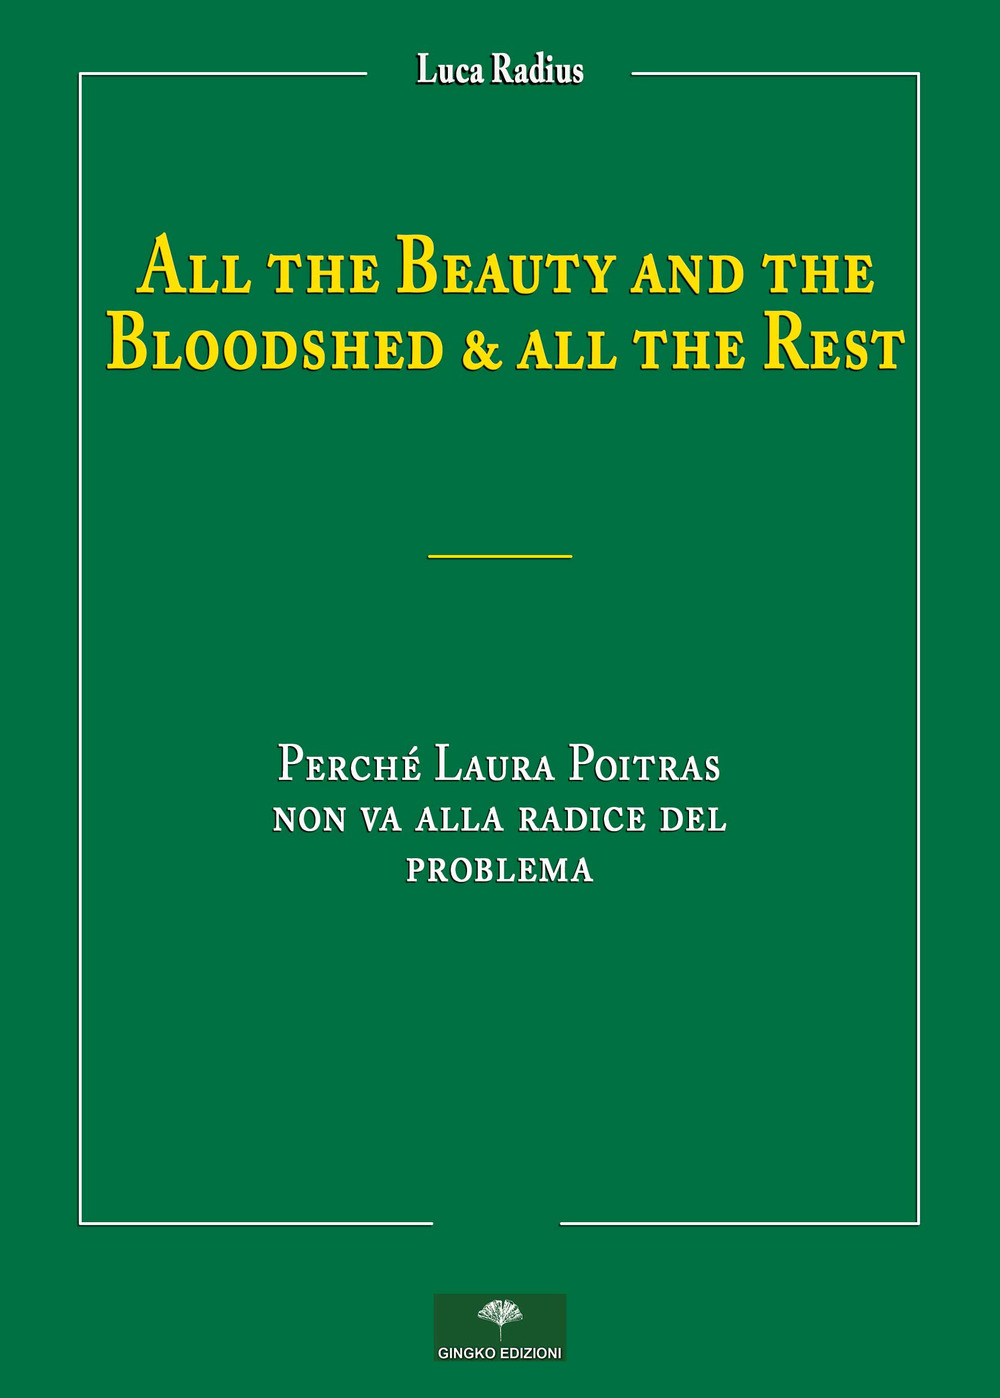 All the beauty and the bloodshed & all the rest. Perché Laura Poitras non va alla radice del problema